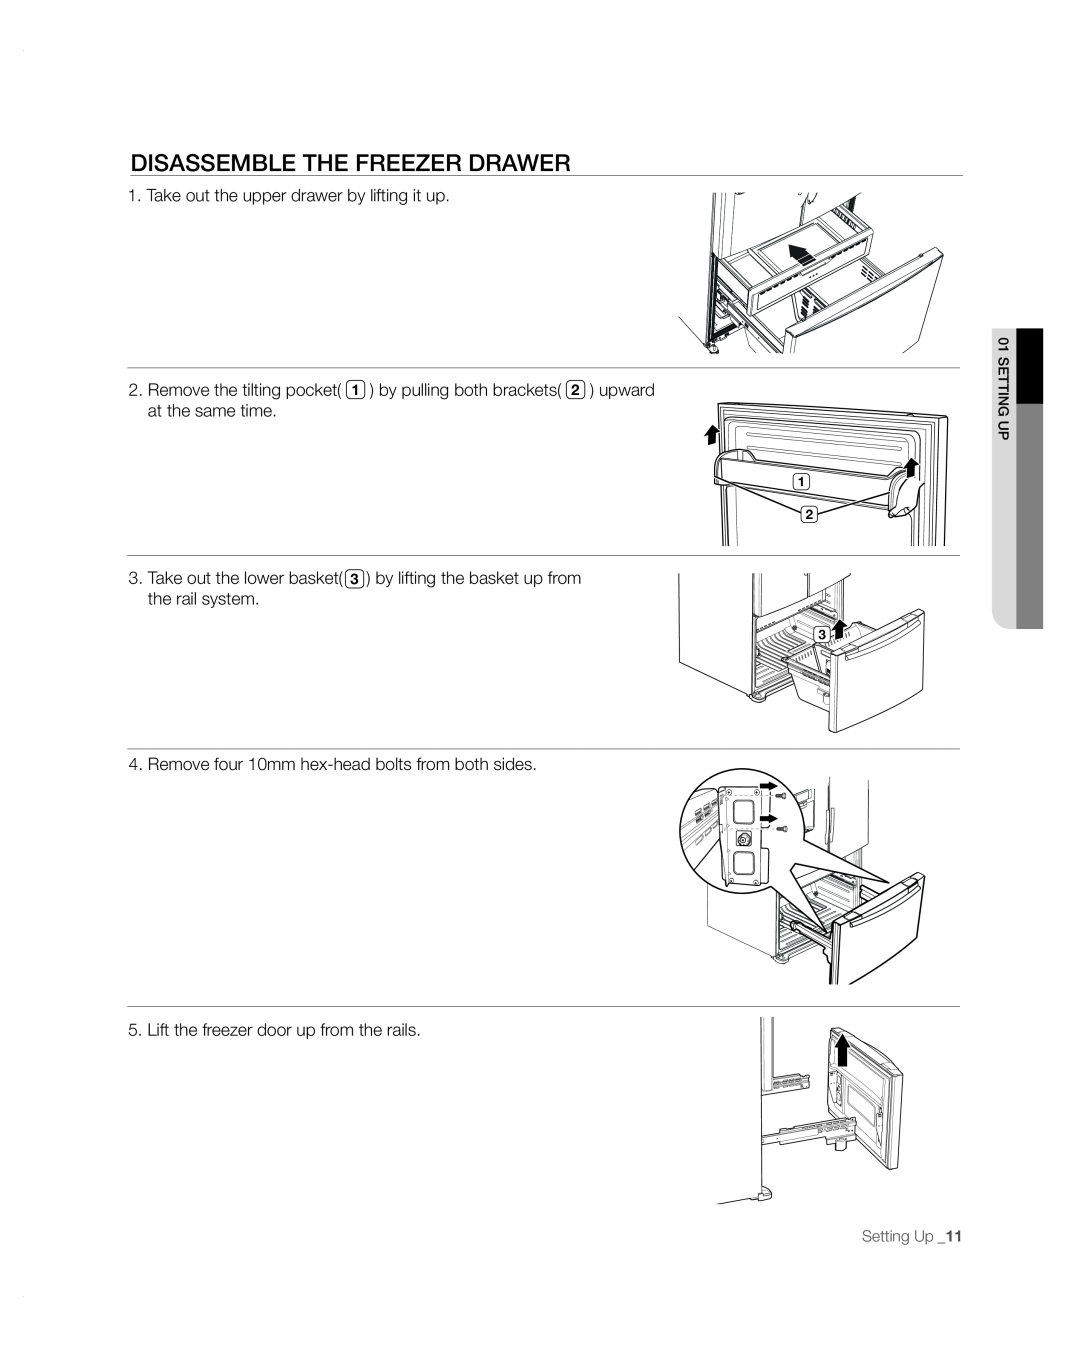 Samsung RFG297AARS/XAA disassemble the freezer drawer, Take out the upper drawer by lifting it up, Setting Up 